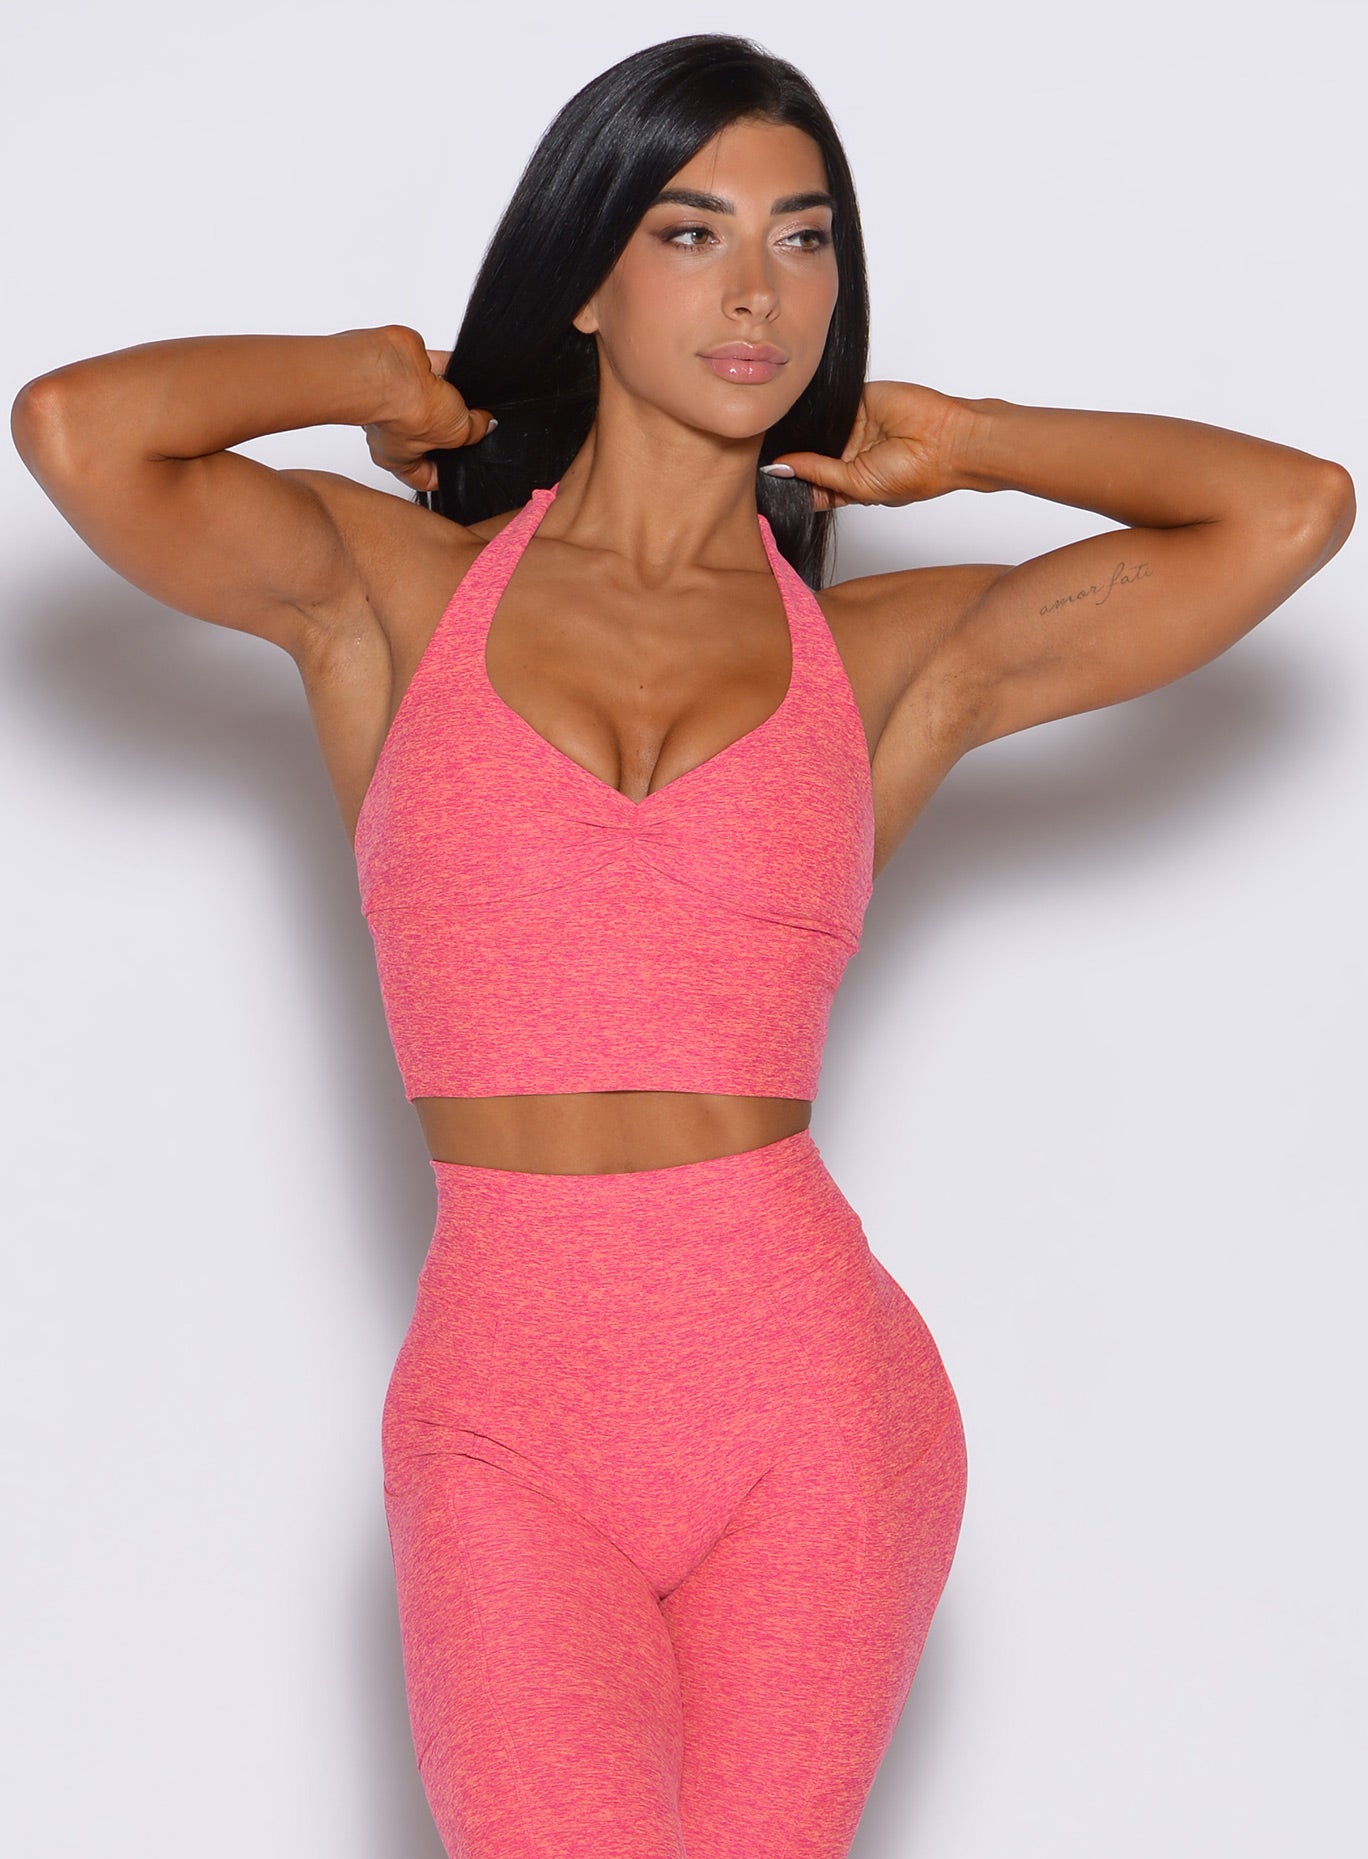 front profile view of a model adjusting her hair wearing our longline backless bra in Neon Tangerine Shock color along with a matching leggings